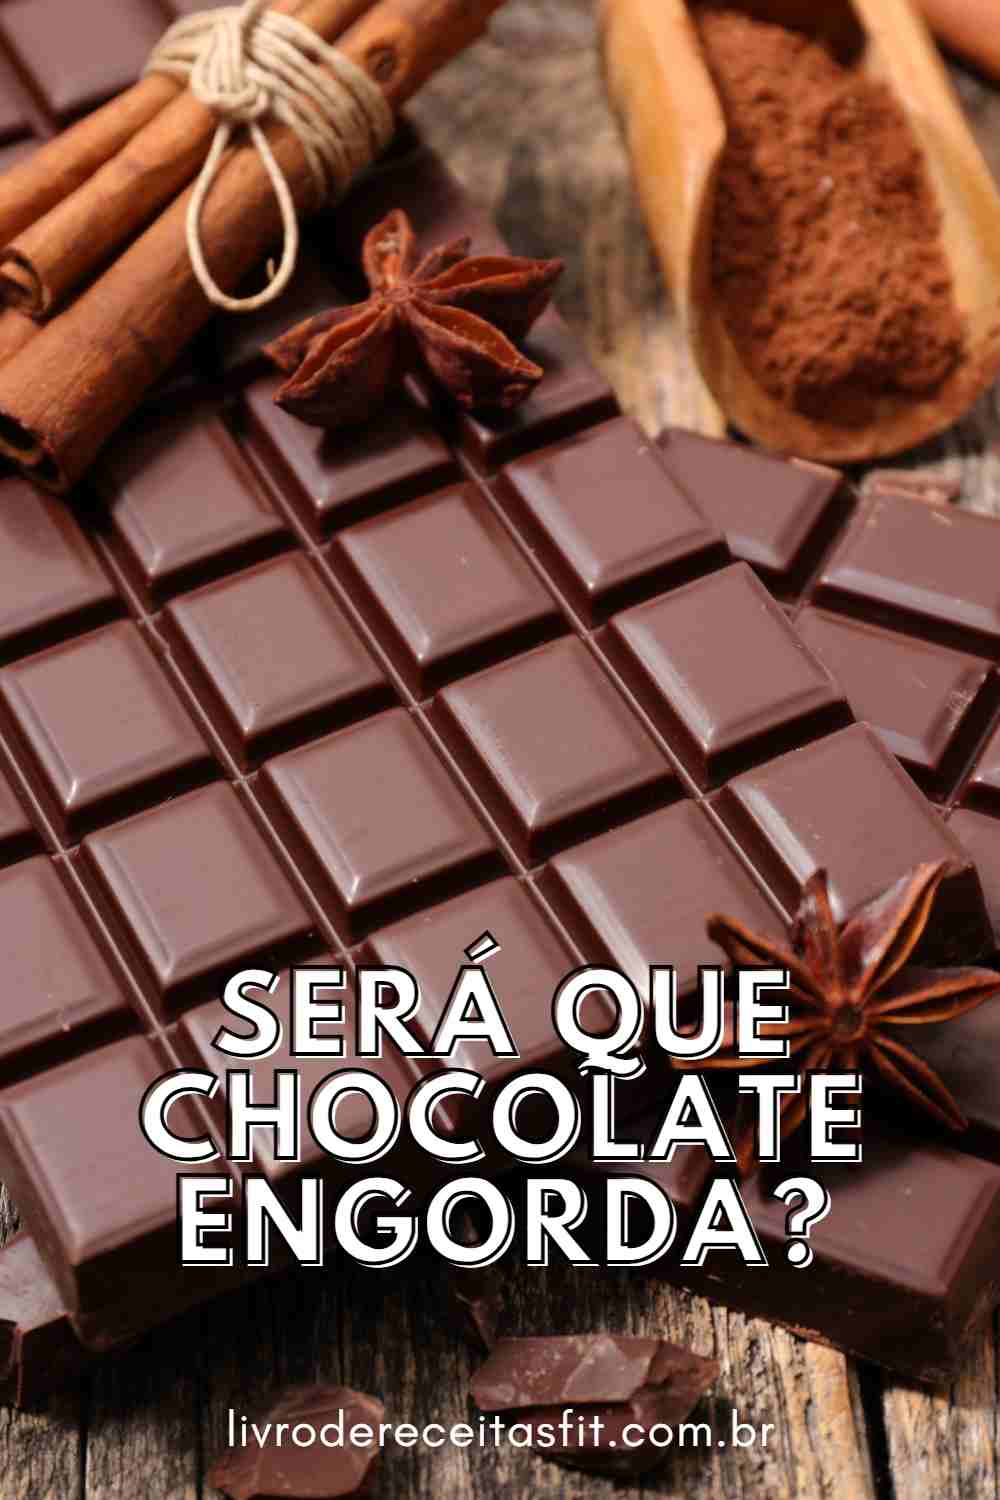 You are currently viewing Chocolate engorda?